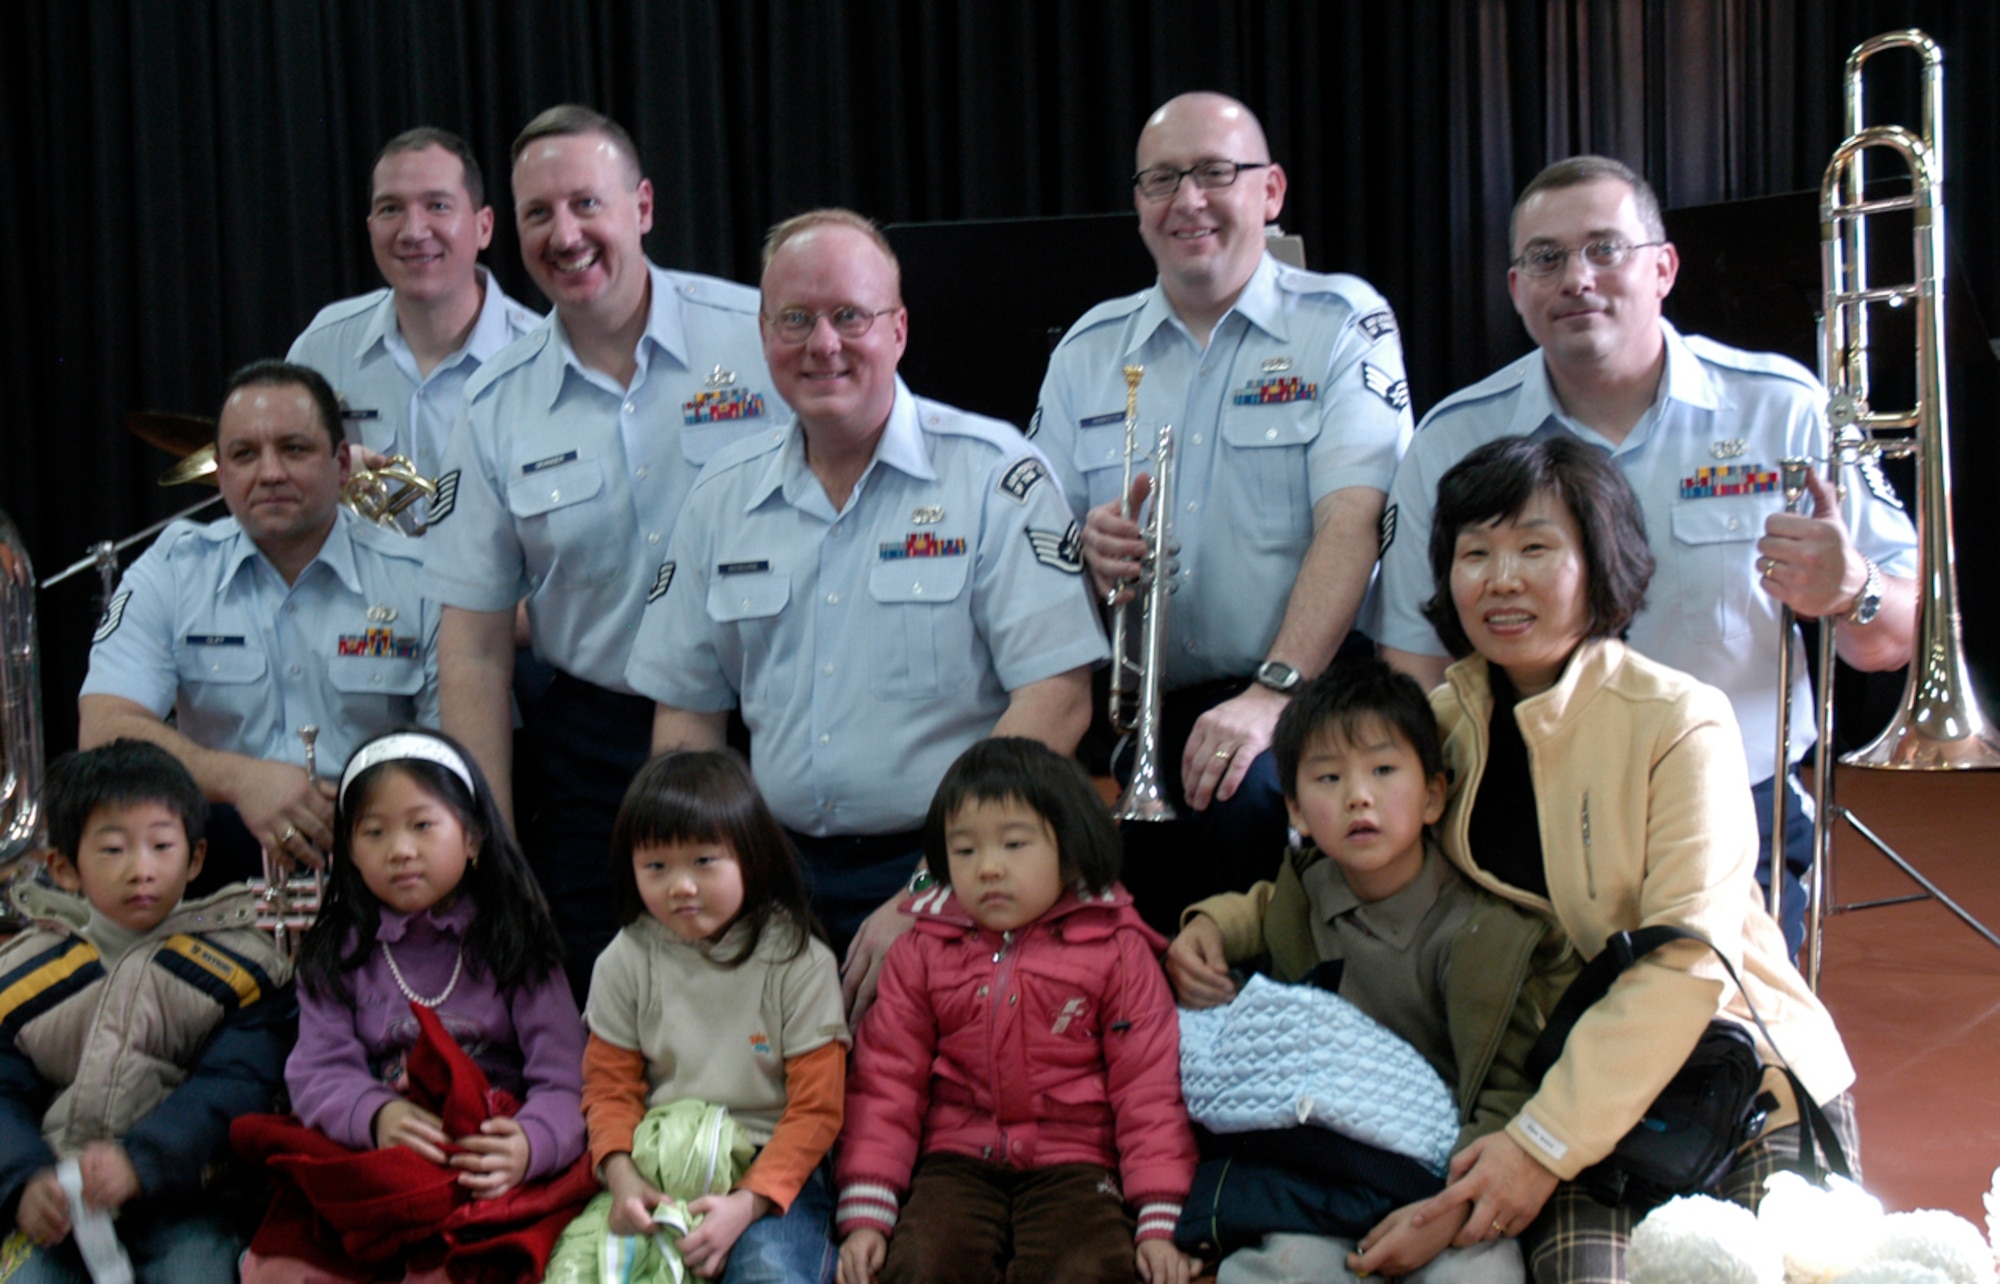 KUNSAN AIR BASE, South Korea -- A teacher and her students of Na Po Elementary School have a photo take with the Air Force Band of the Pacific after their performance at the local Gunsan City School Dec. 5. The Elmendorf Air Force Base, Alaska based band performed for more than 300 students, parents and teachers as part of their civic outreach and the base?s Good Neighbor Program. (U.S. Air Force Photo/Master Sgt. Sean P. Houlihan)